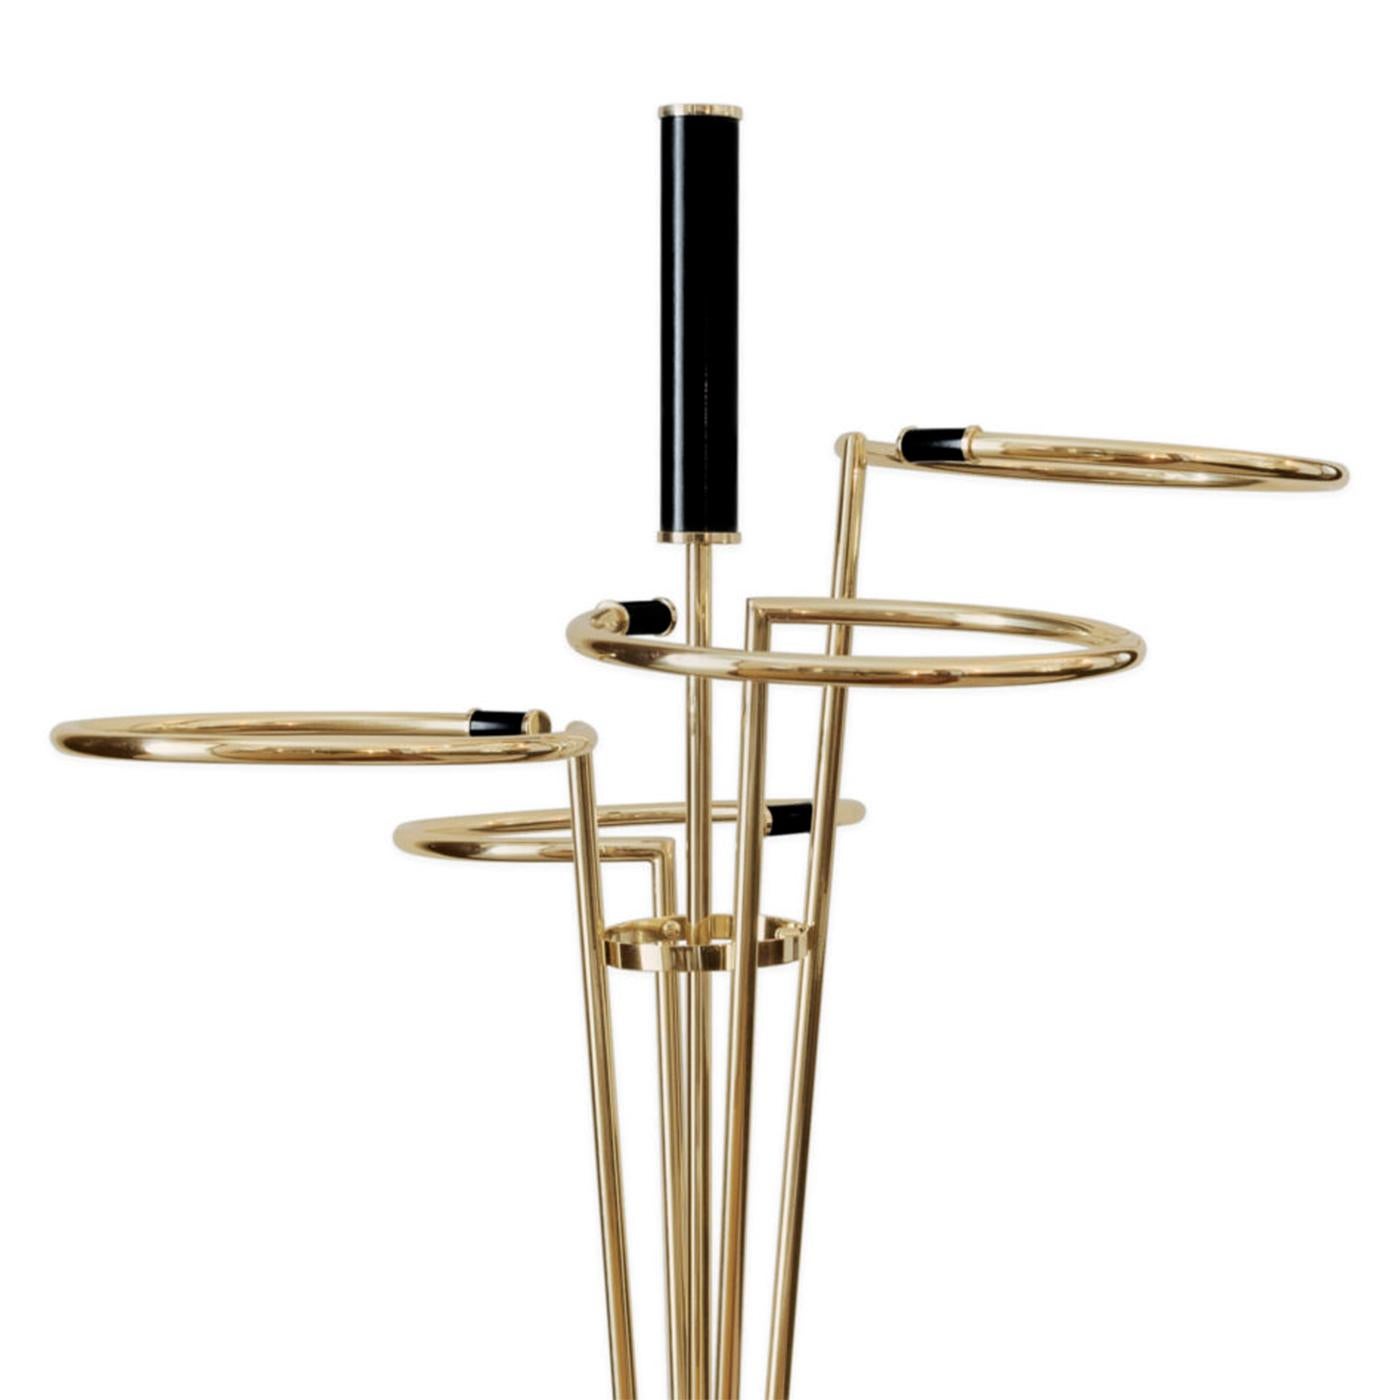 Umbrella stand Touquet with polished Carrara marble
base. With structure in stainless steel in gold finish and
with a black handle. With 4 rings made to contain 4 to 8
umbrellas.
 